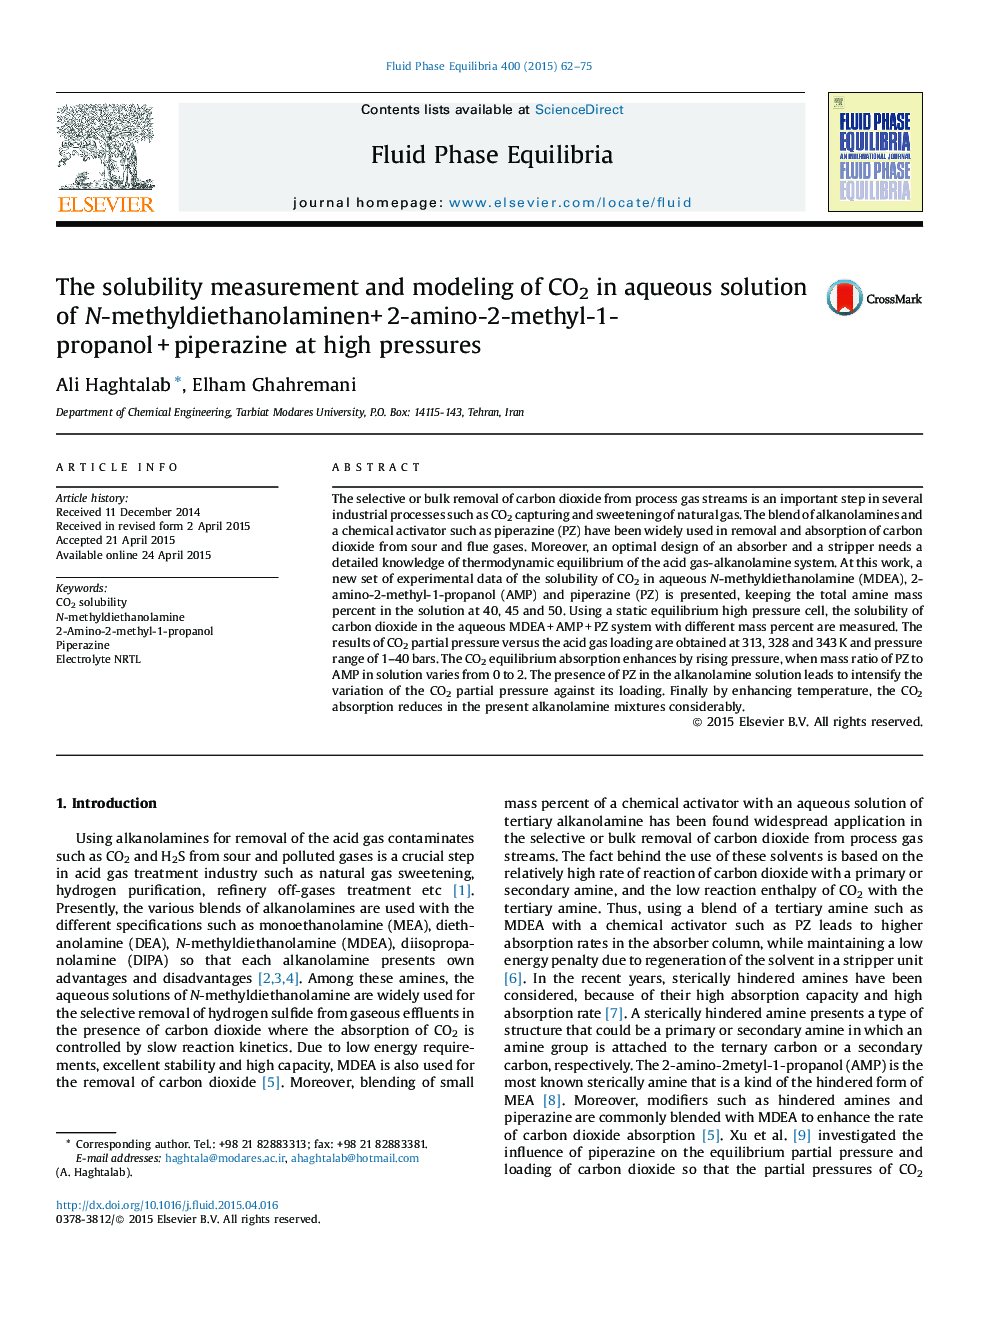 The solubility measurement and modeling of CO2 in aqueous solution of N-methyldiethanolaminen+ 2-amino-2-methyl-1-propanol + piperazine at high pressures